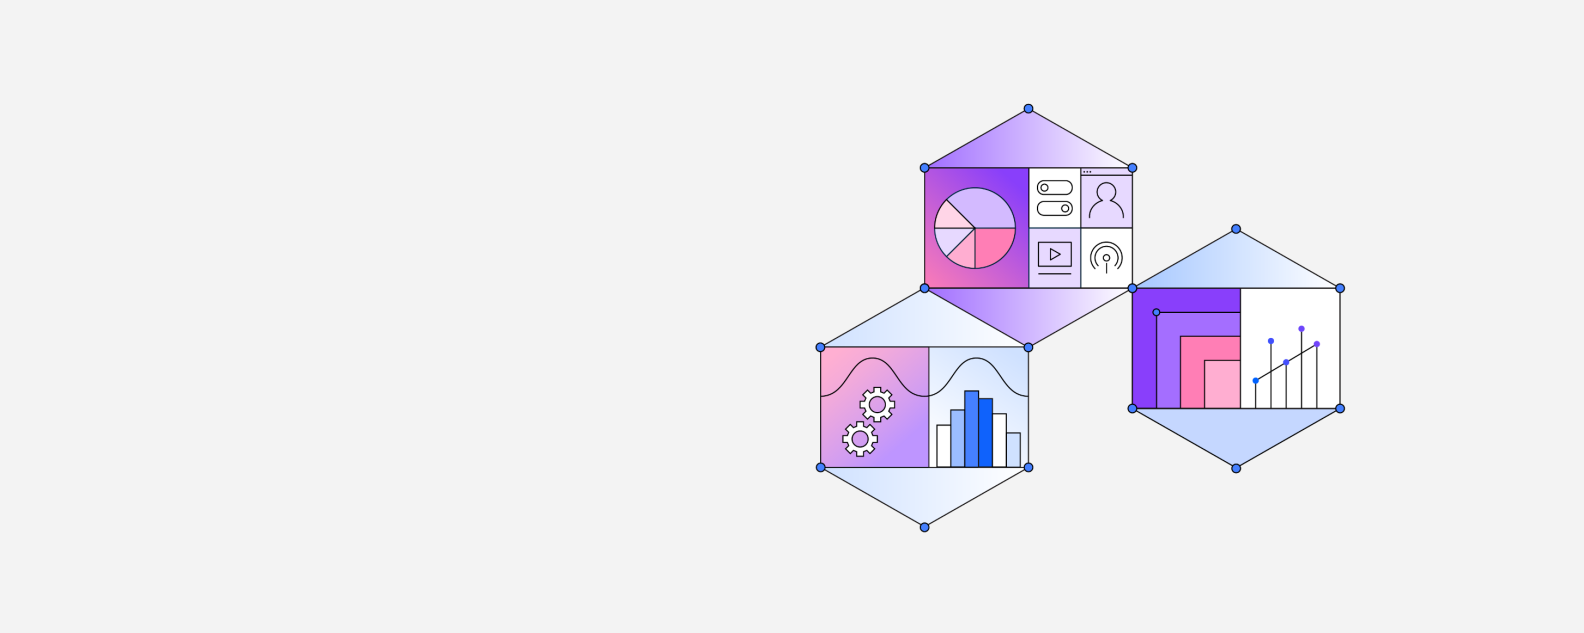 Illustration showing a hexagon with a graphs and charts inside